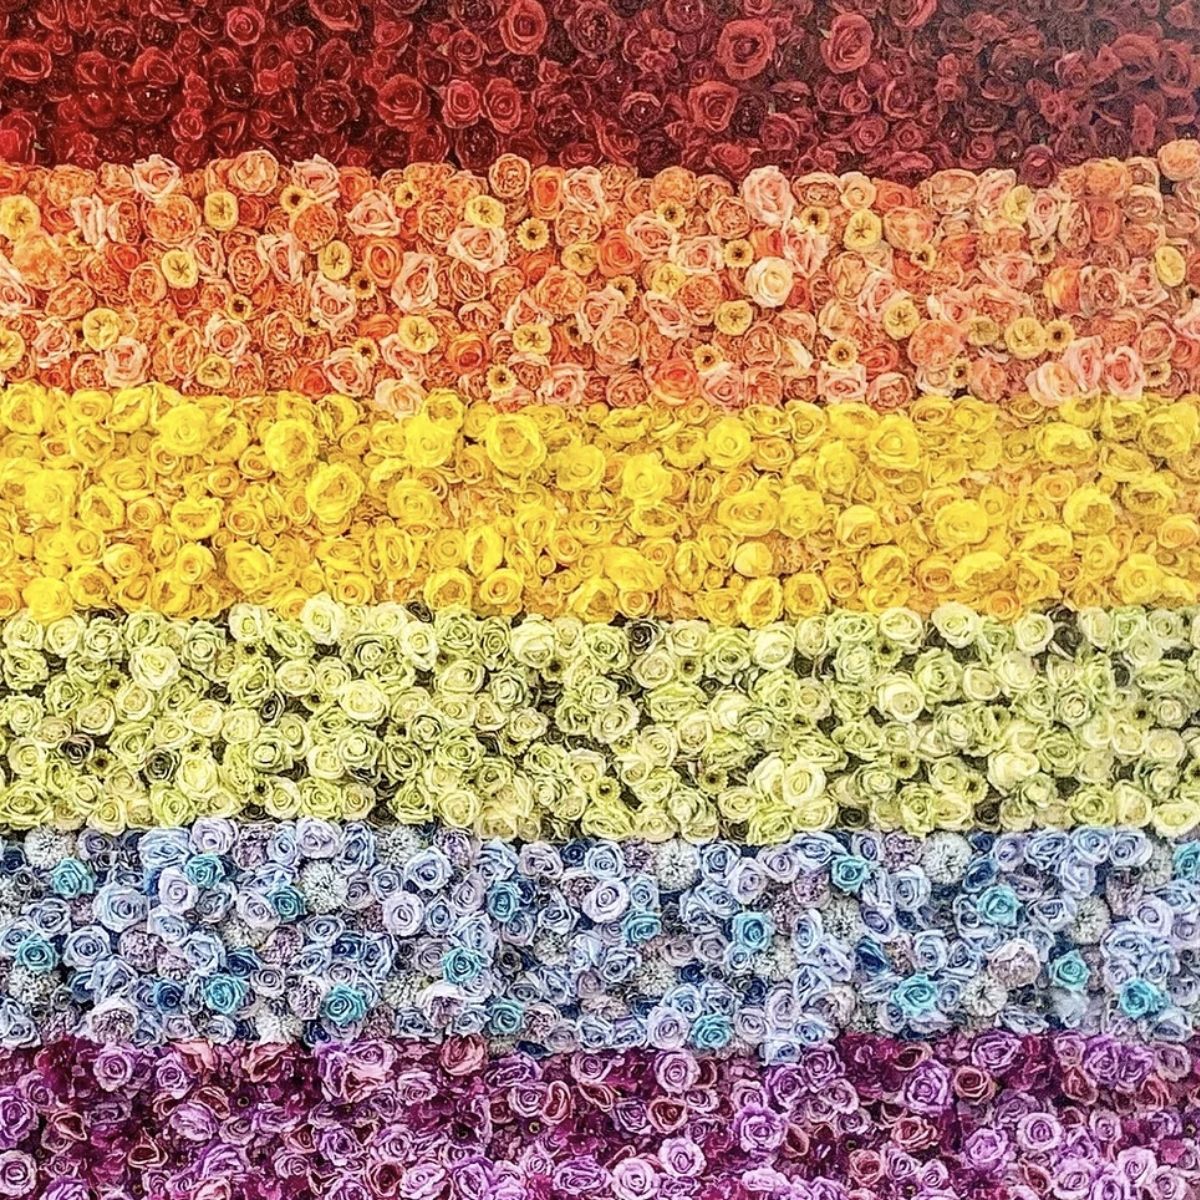 roses in all colors of the rainbow